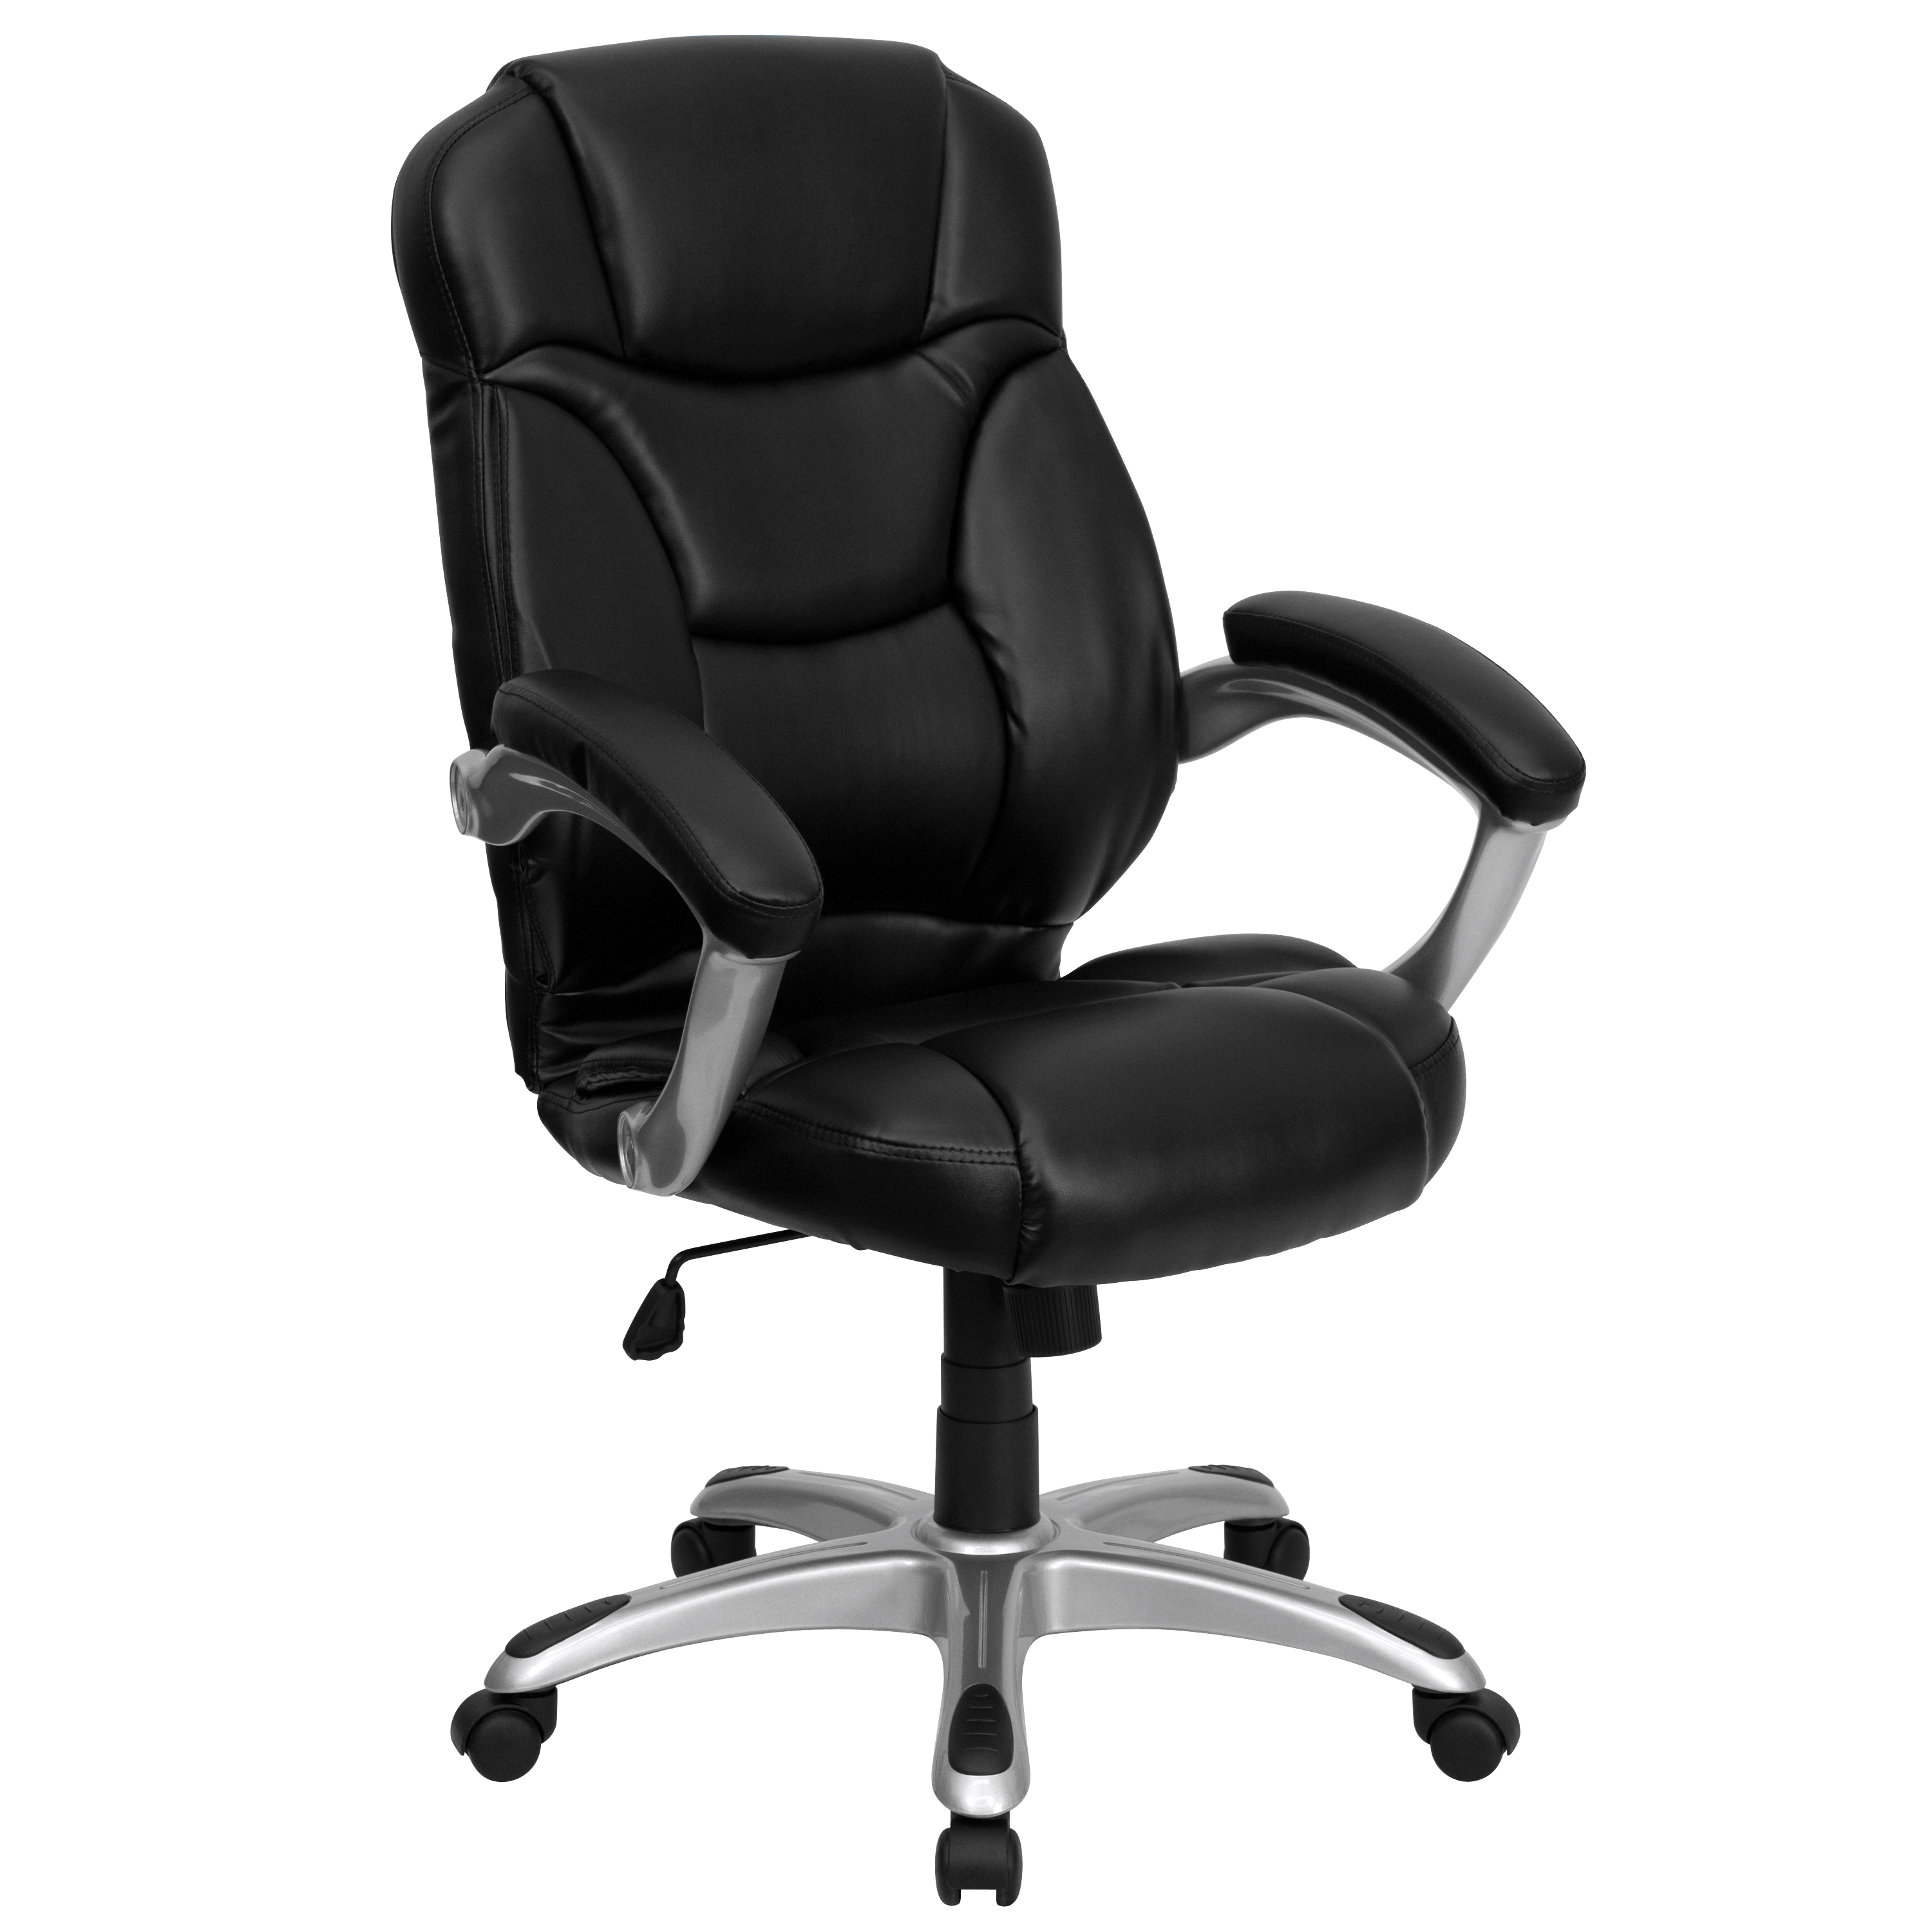 Flash Furniture High Back Black LeatherSoft Contemporary Executive Swivel Ergonomic Office Chair with Silver Nylon Base and Arms - image 1 of 6